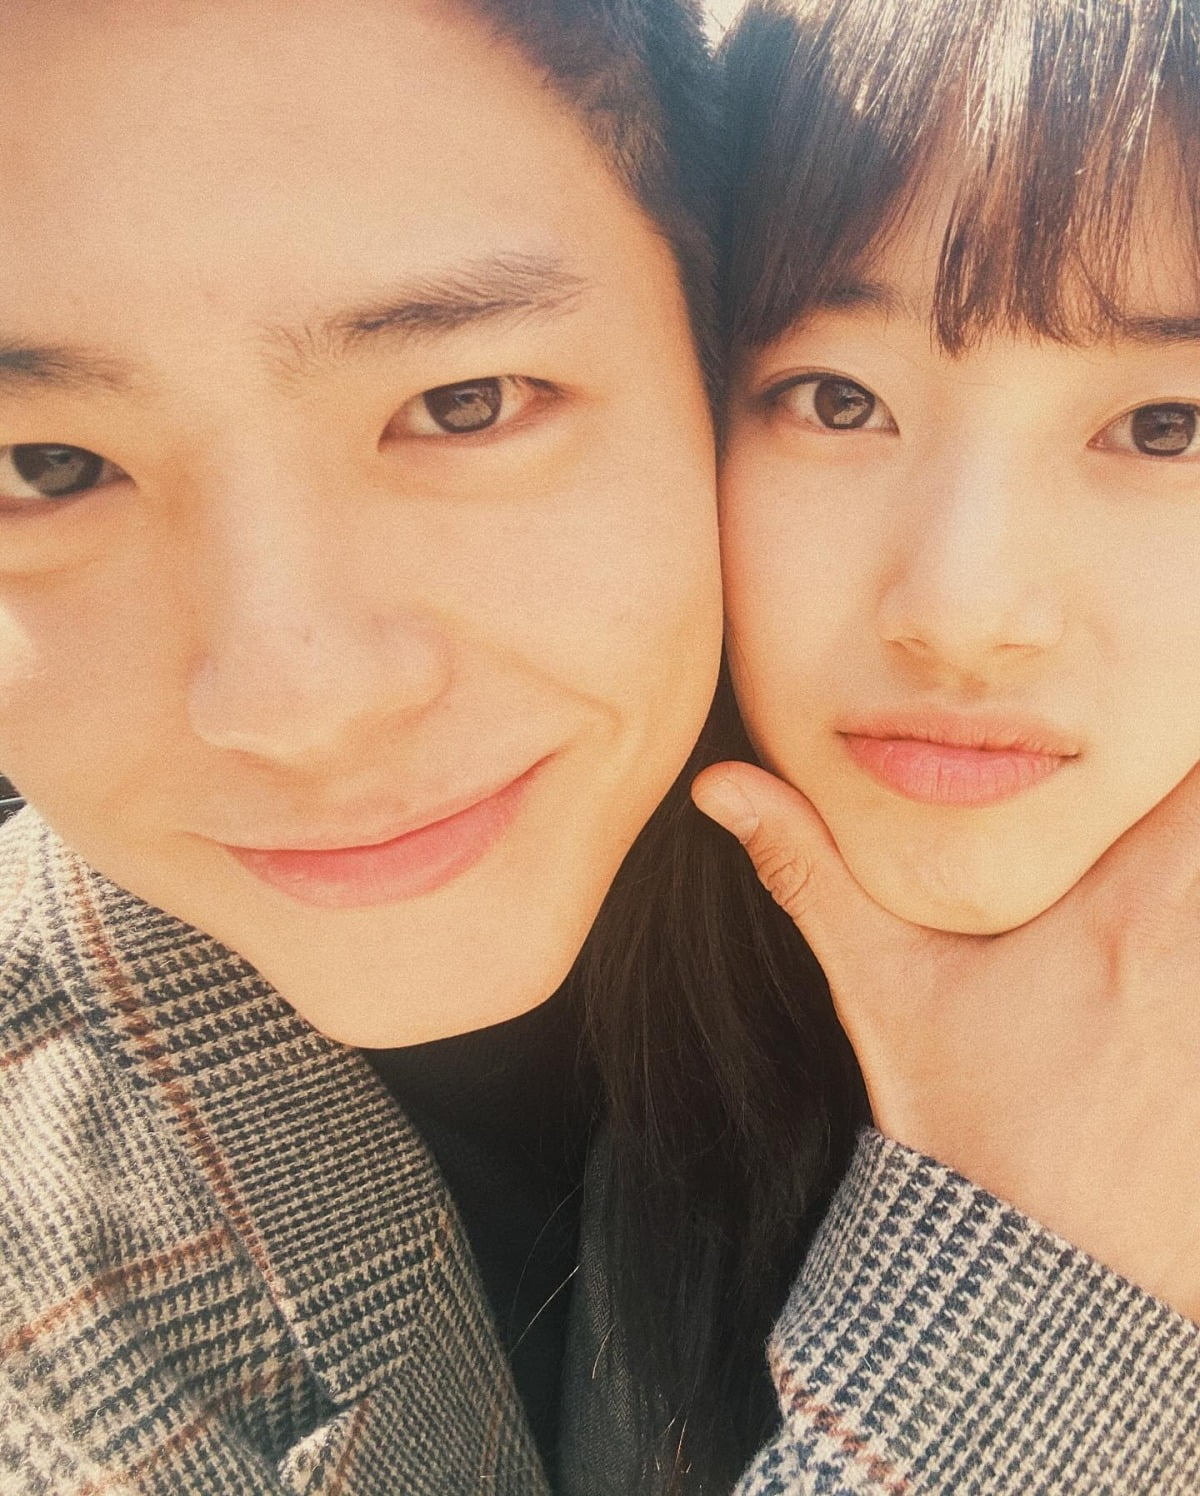 Suzy reveals a close selfie with Park Bo-gum... A warm atmosphere like that of a lover